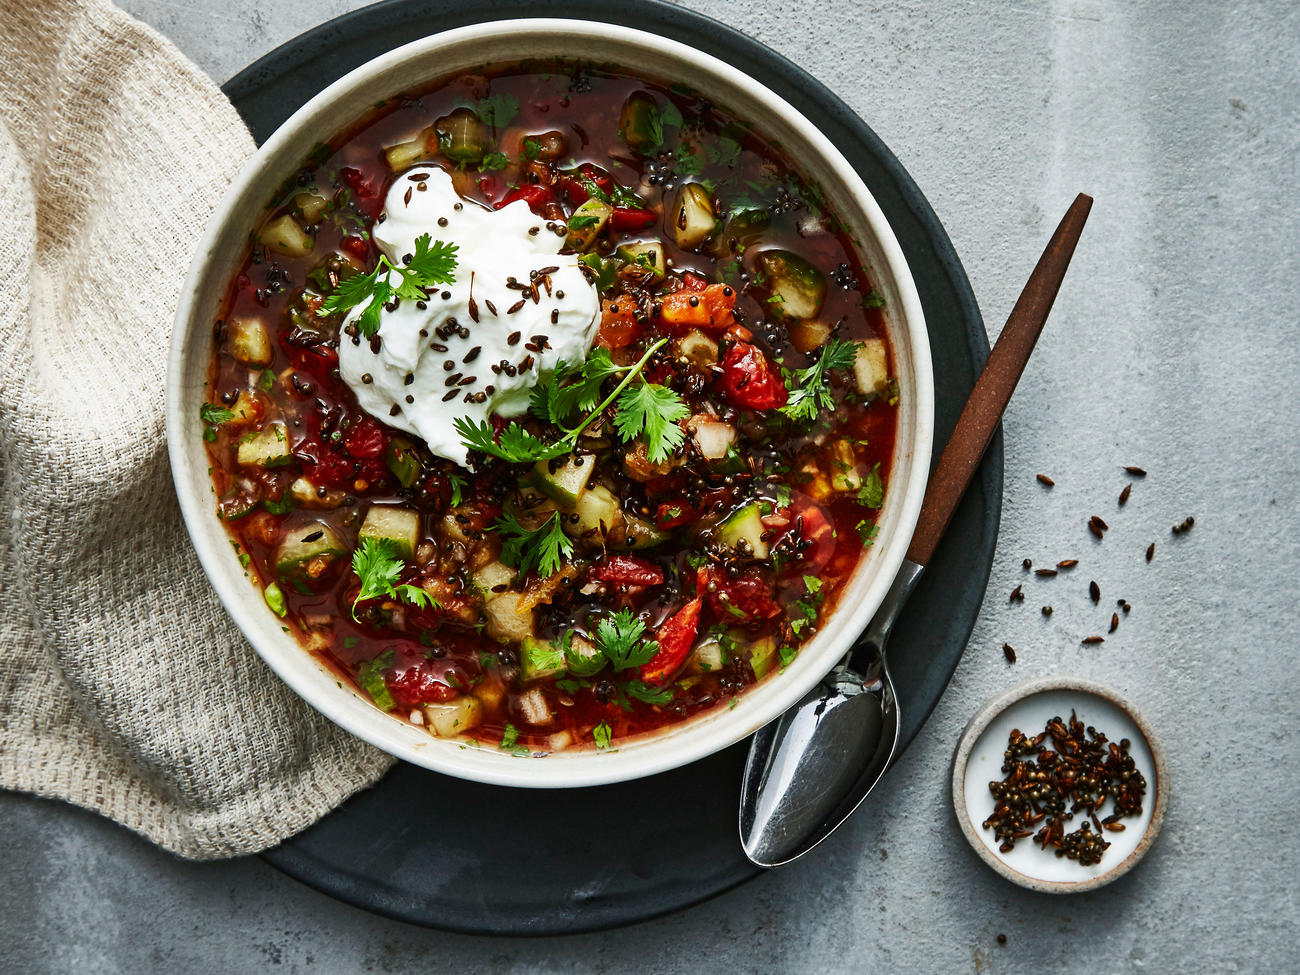 Sip-Worthy Soup Recipes to Keep You Warm All Winter Long